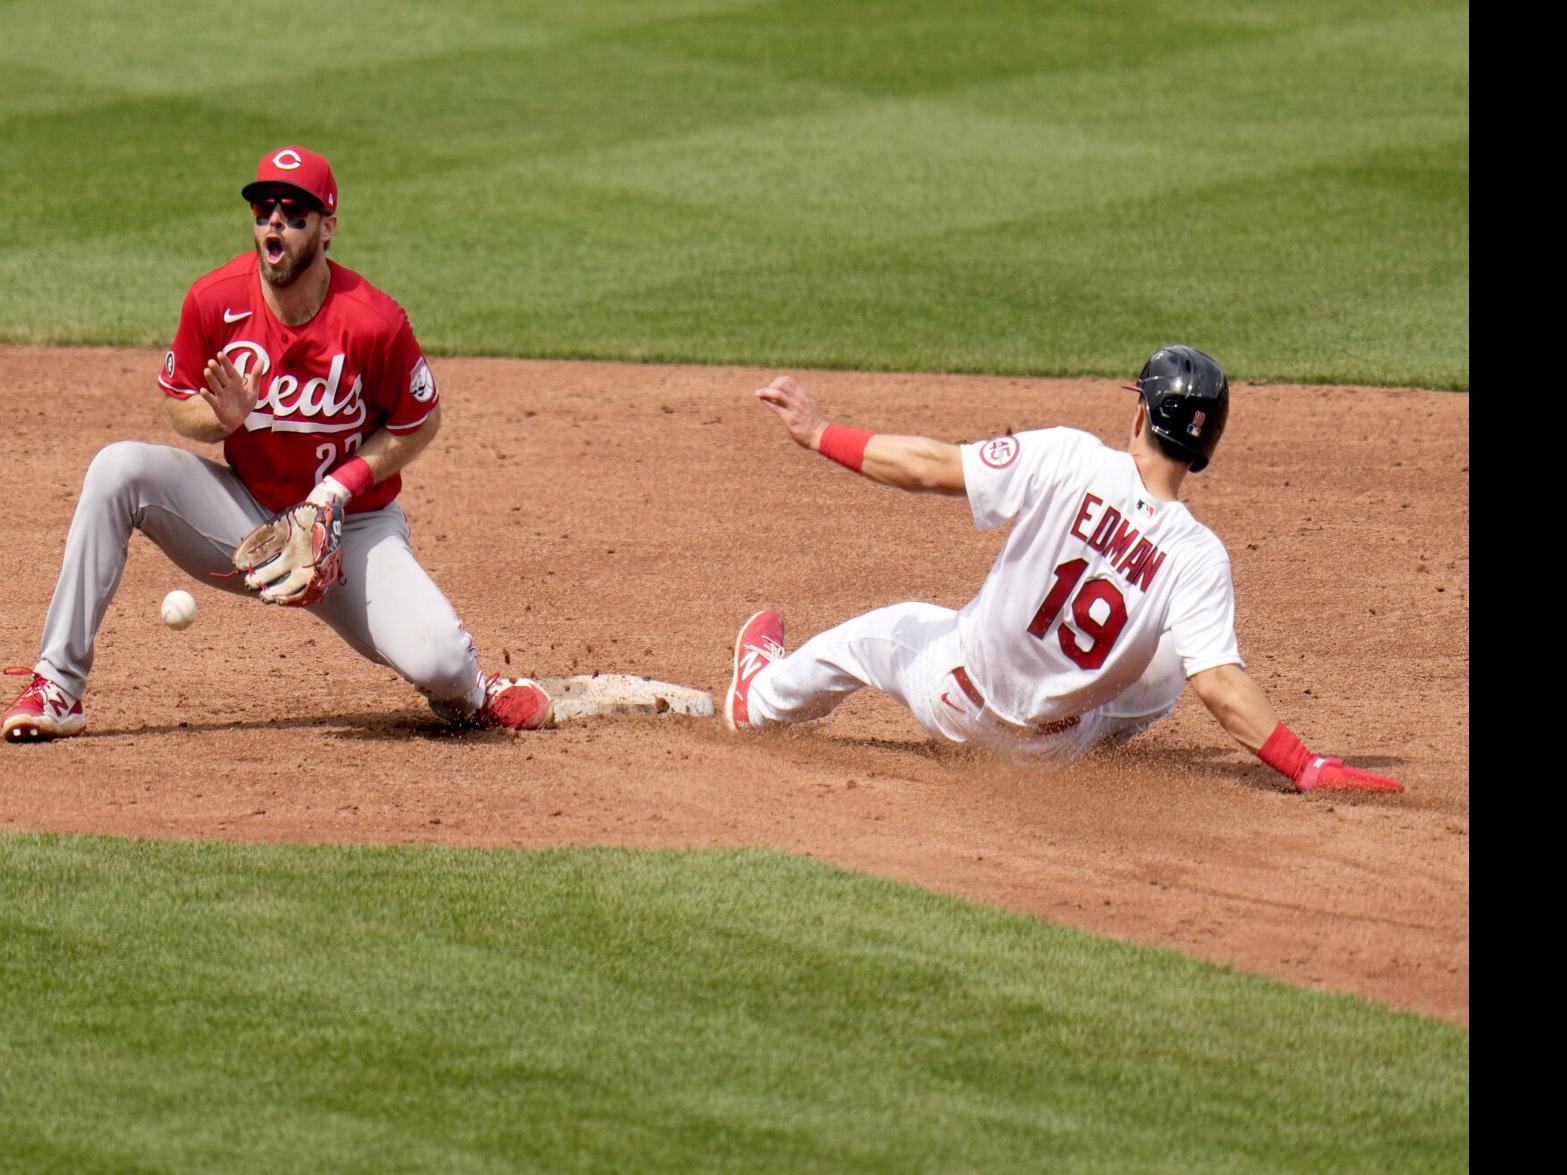 Cardinals score seven runs in sixth inning, still lose 8-7 to Reds